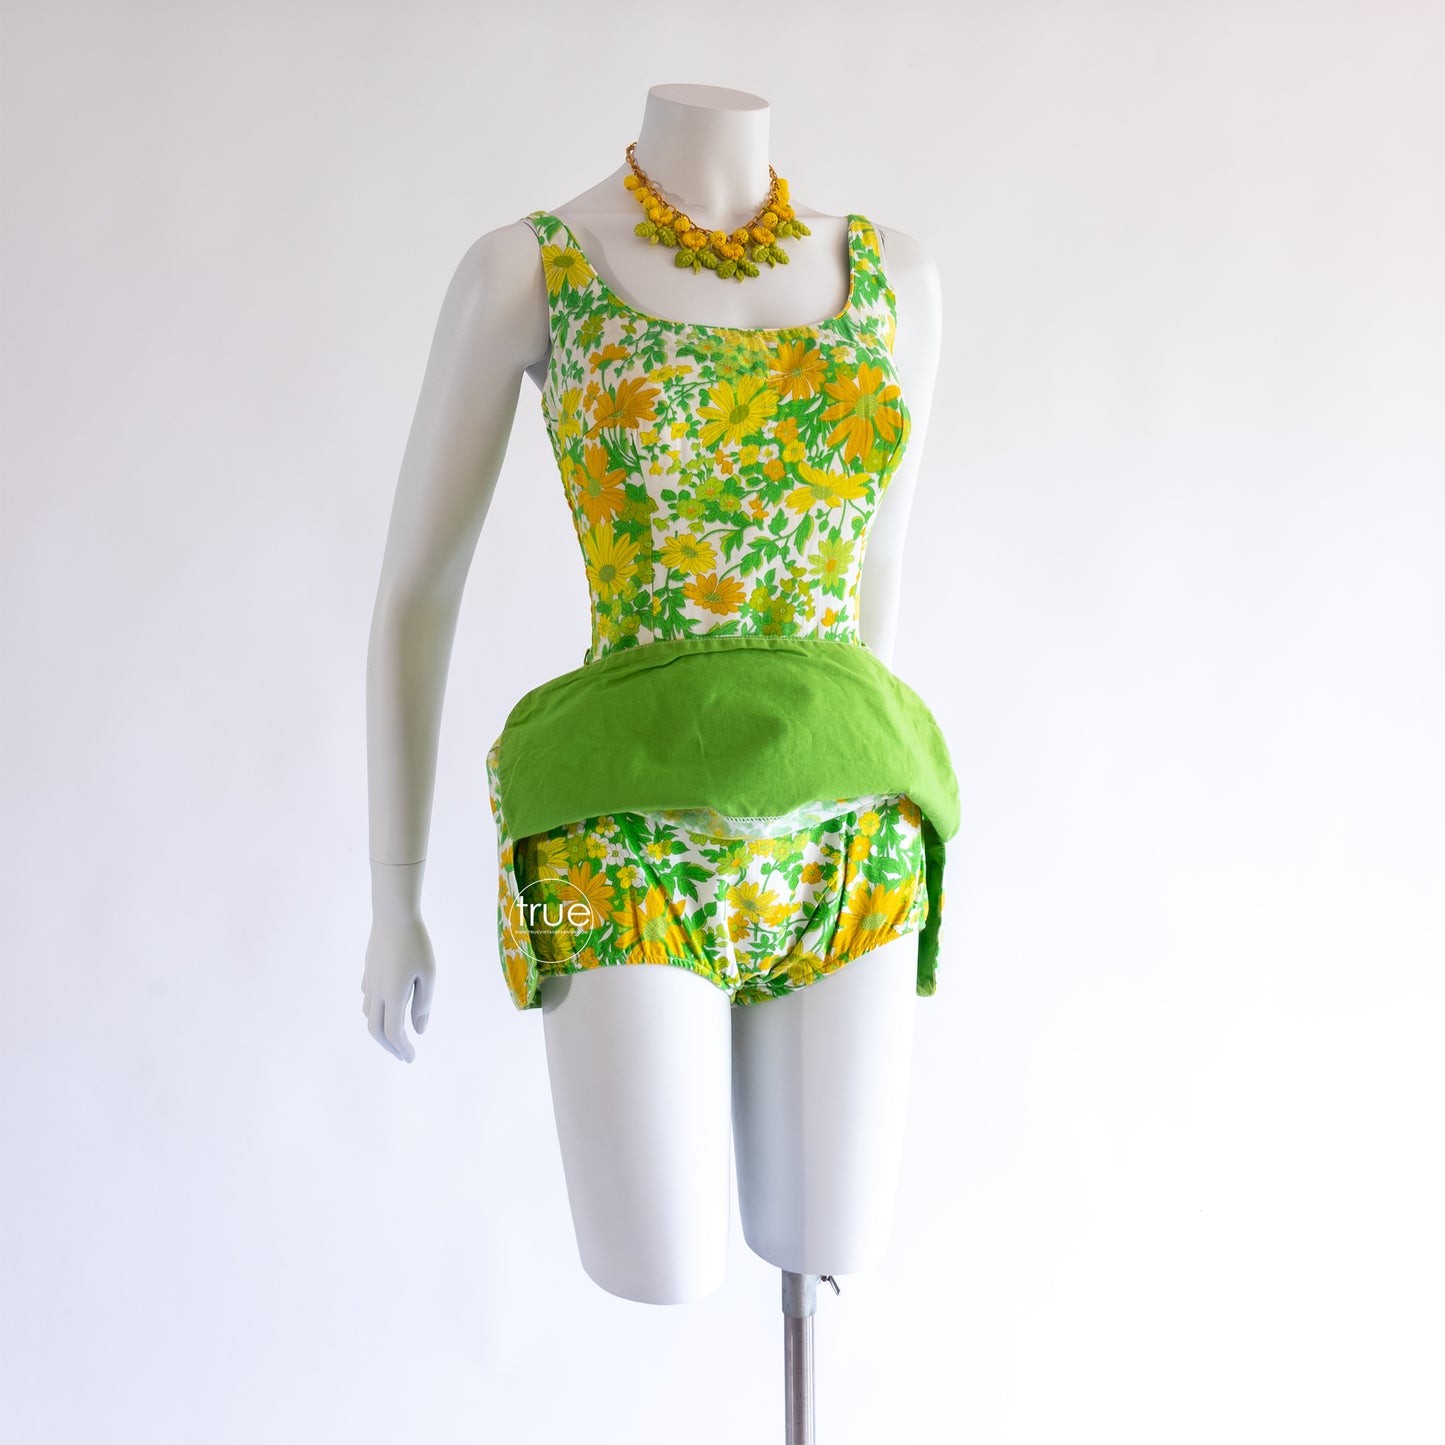 vintage 1960's romper ...fun COLE of California daisy print shorts convertible romper playsuit swimsuit